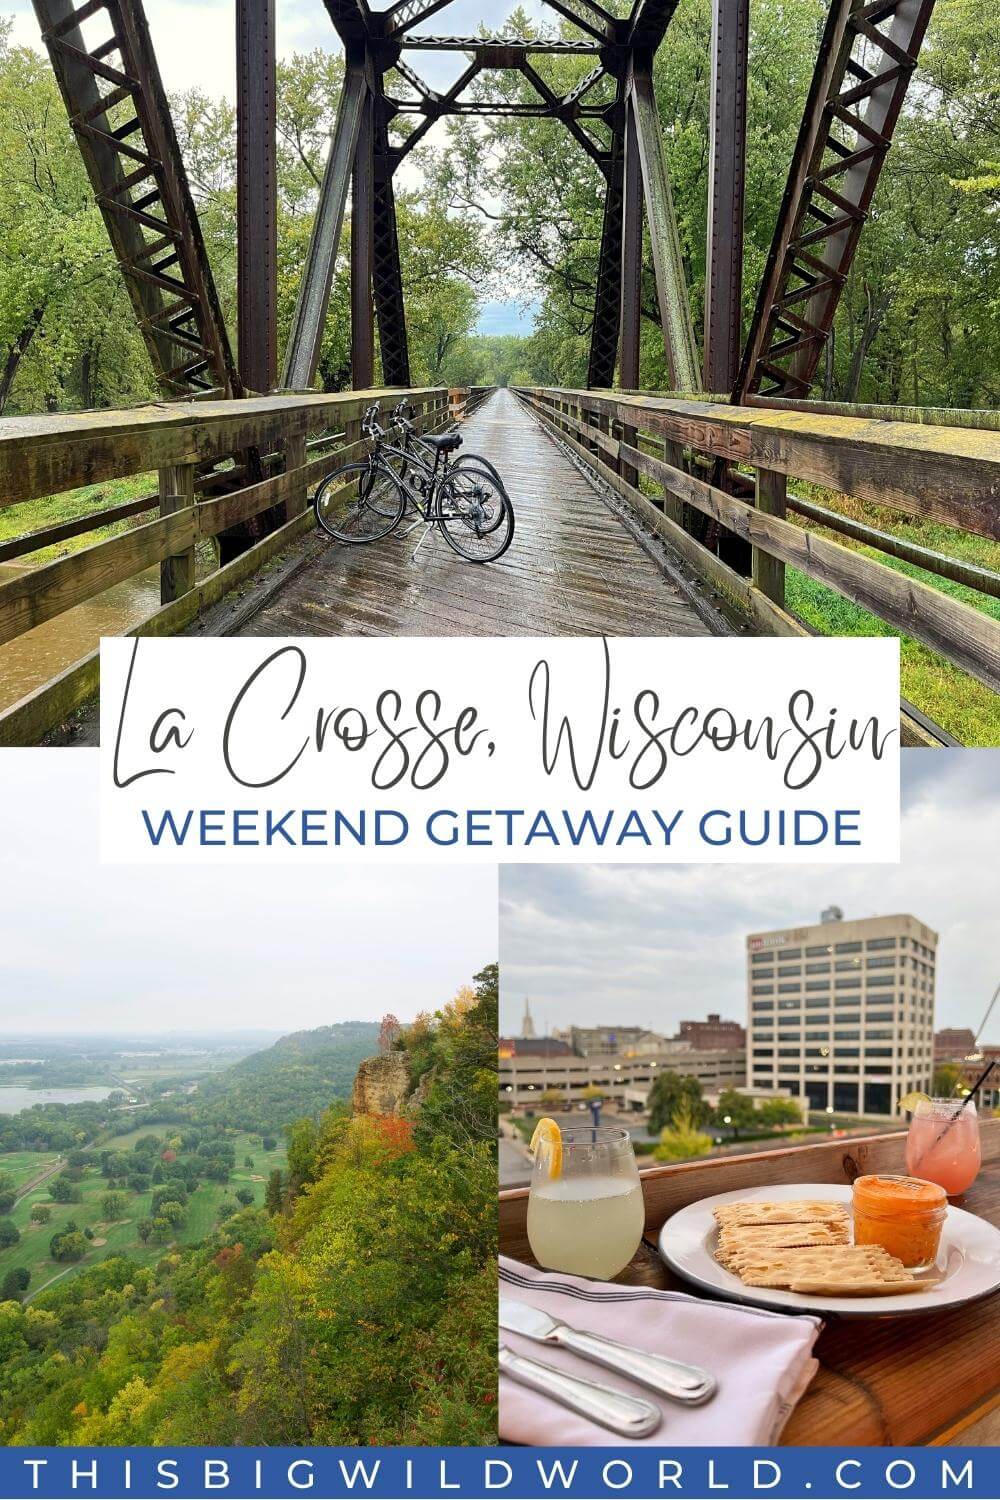 Text: La Crosse Wisconsin Weekend Getaway Guide
Images: Bikes on a bridge in a forest, forest covered bluffs, cocktails on the ledge of a rooftop patio.